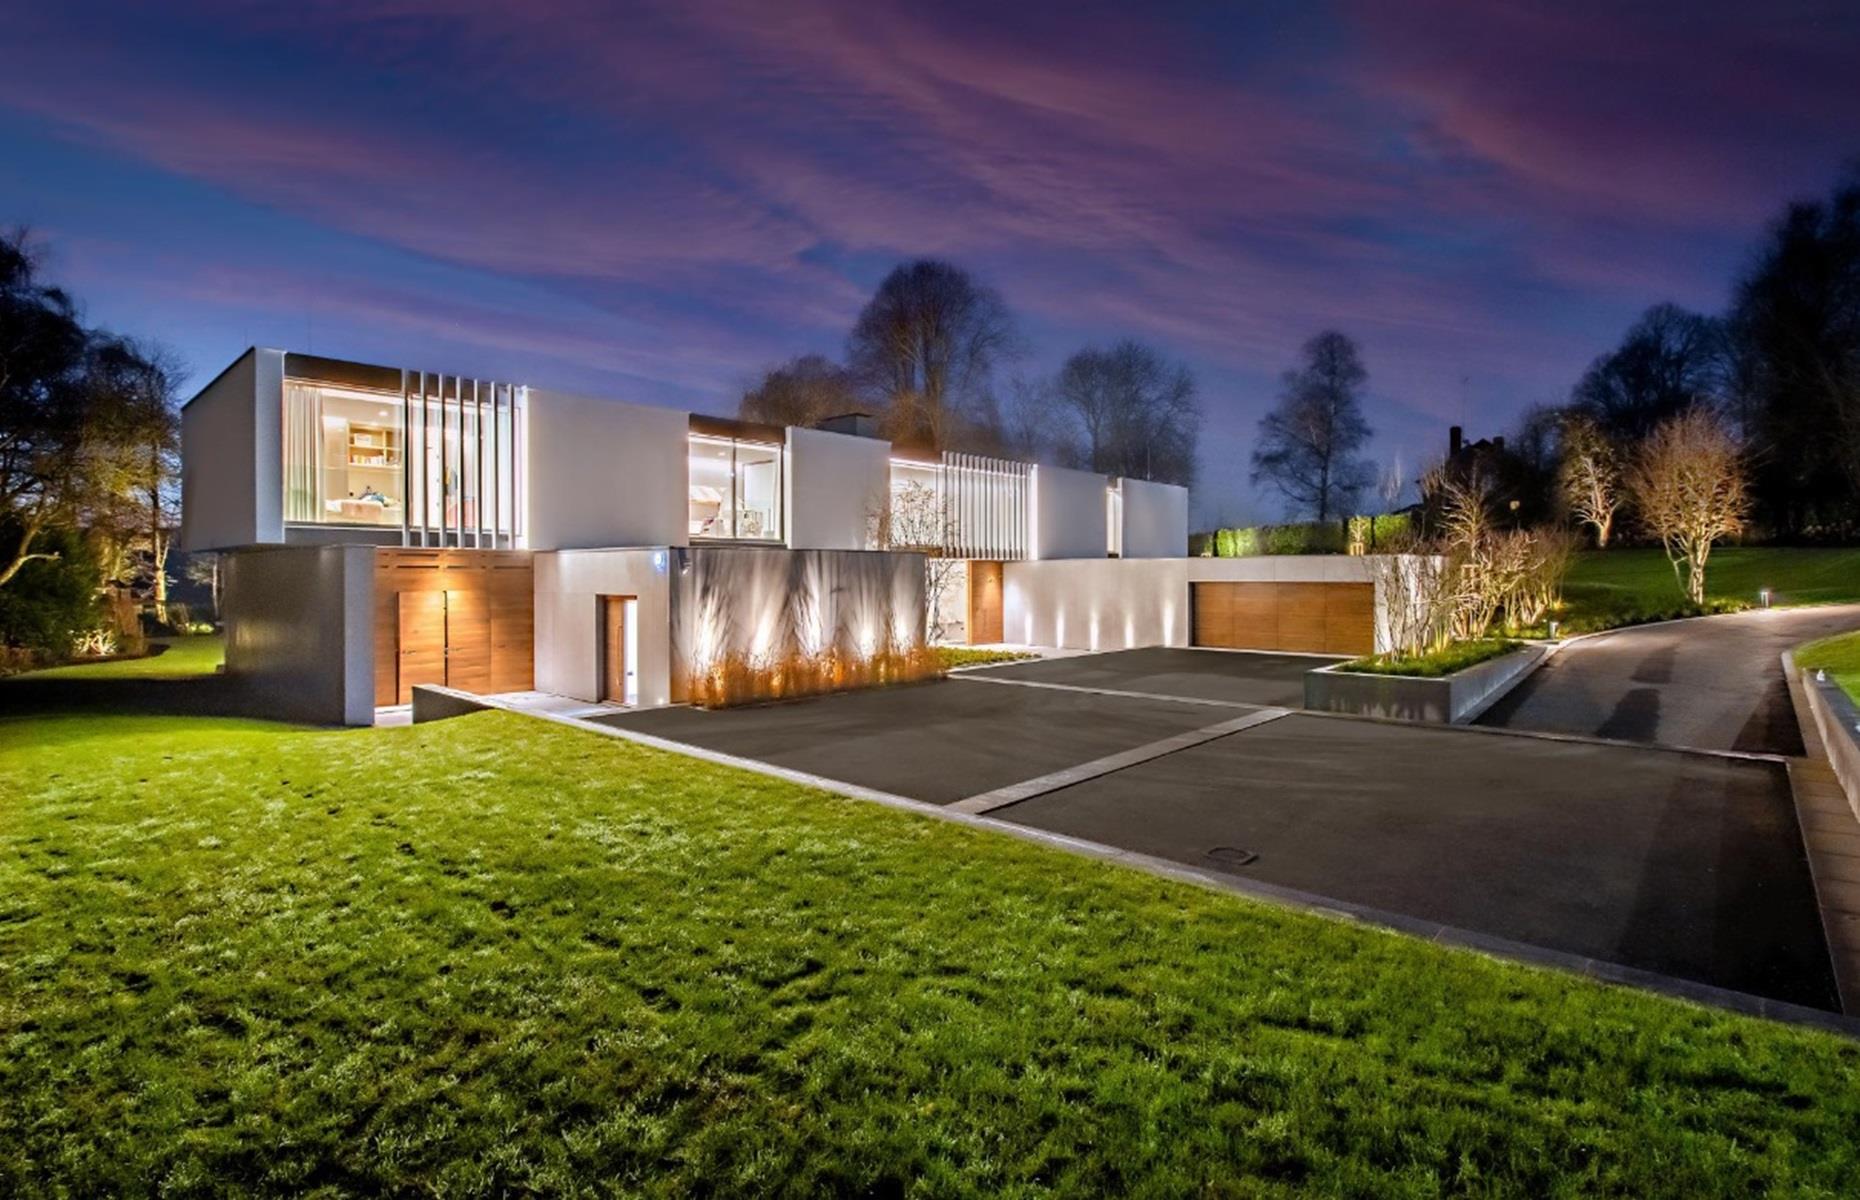 <p>Nestled on almost four acres in the English village of Radlett, Hertfordshire, this show-stopping mansion sits behind secure gates and is approached via a sweeping driveway that only adds to the drama. Measuring 8,000 square feet, the pad was designed and finished to an exquisite standard, incorporating cutting-edge technology and eye-popping interior design.</p>